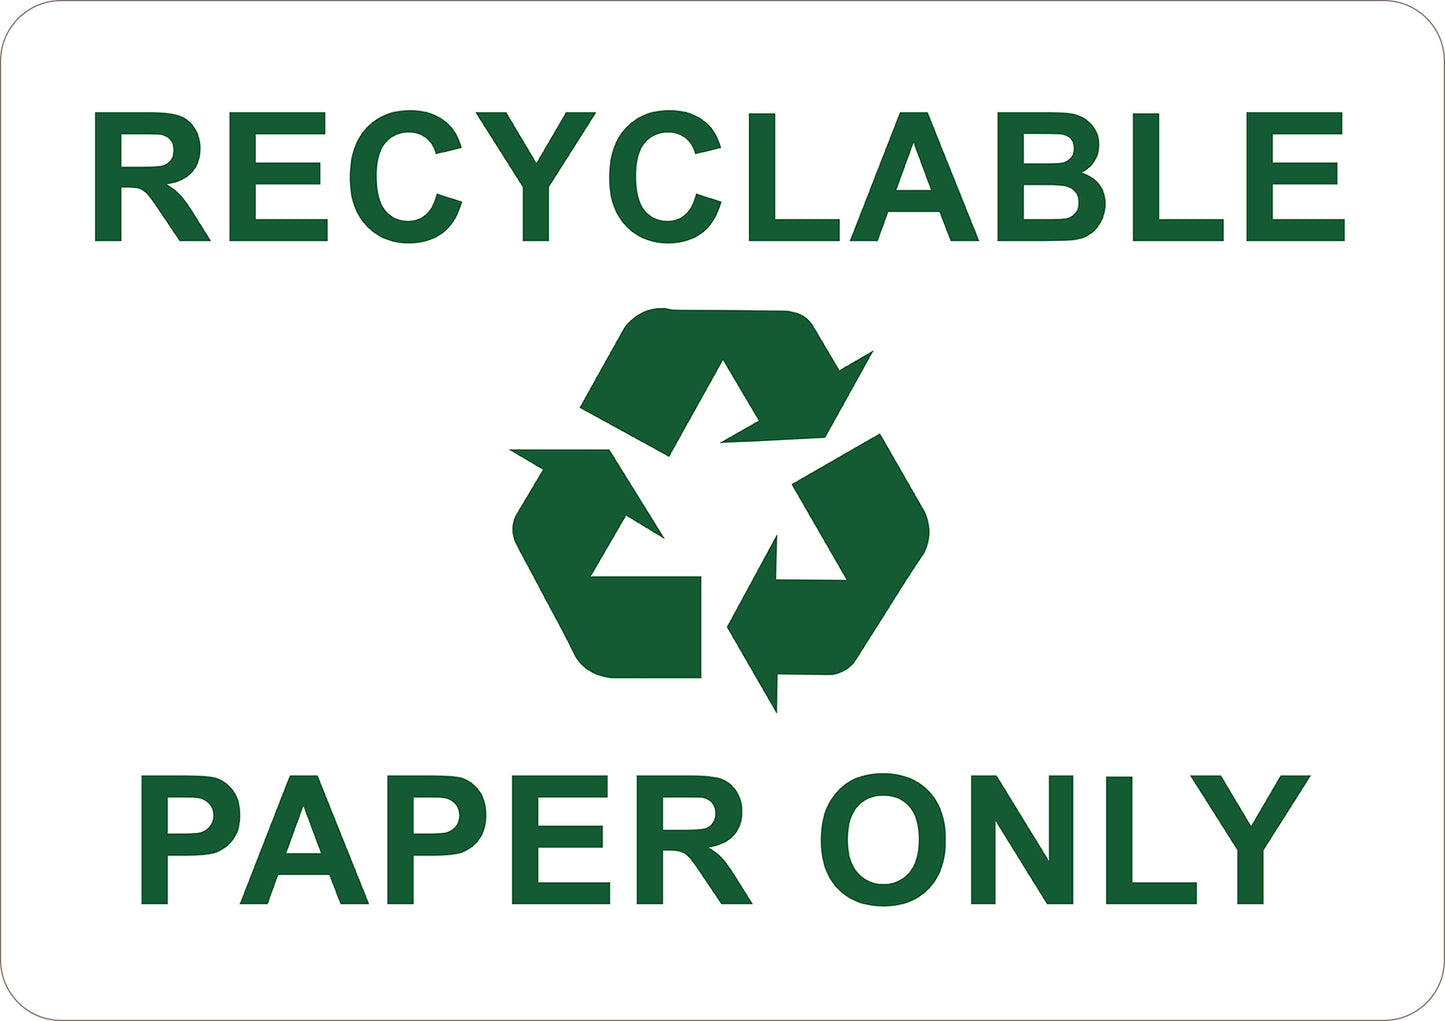 Recyclable Paper Only Printed Sign